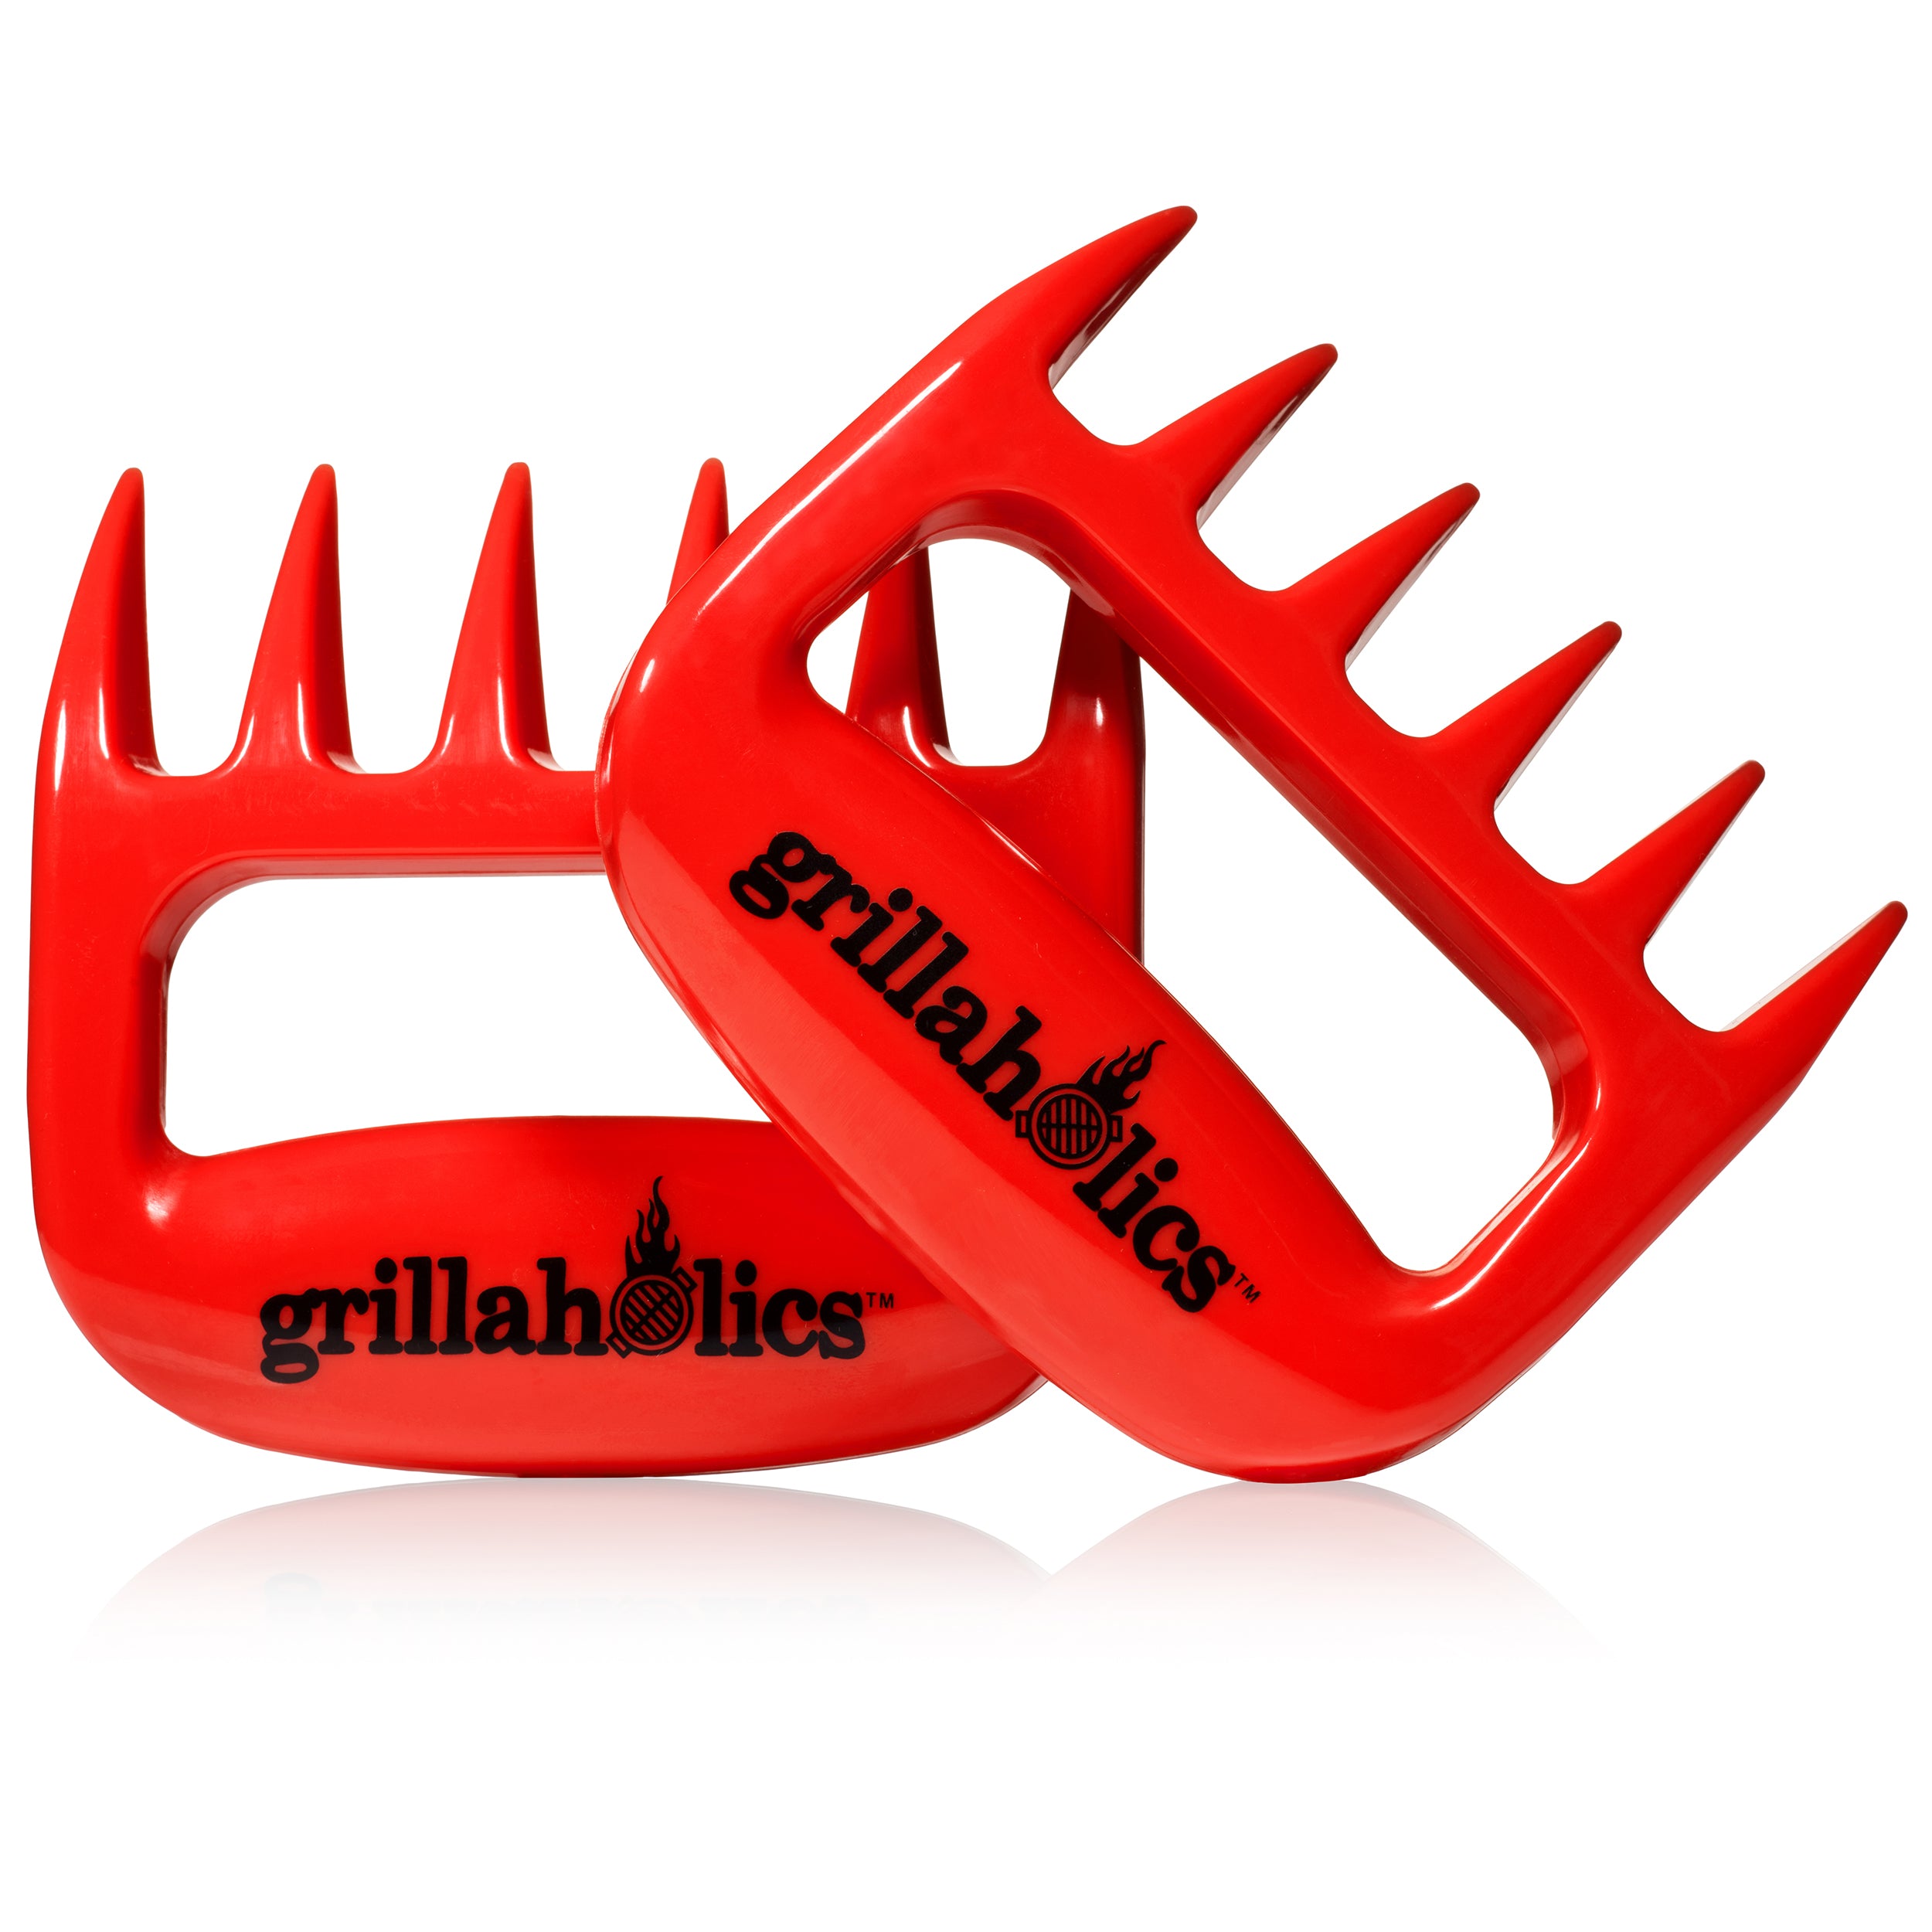 Meat Claws - Professional Grade Pulled Pork Shredders - Grillaholics